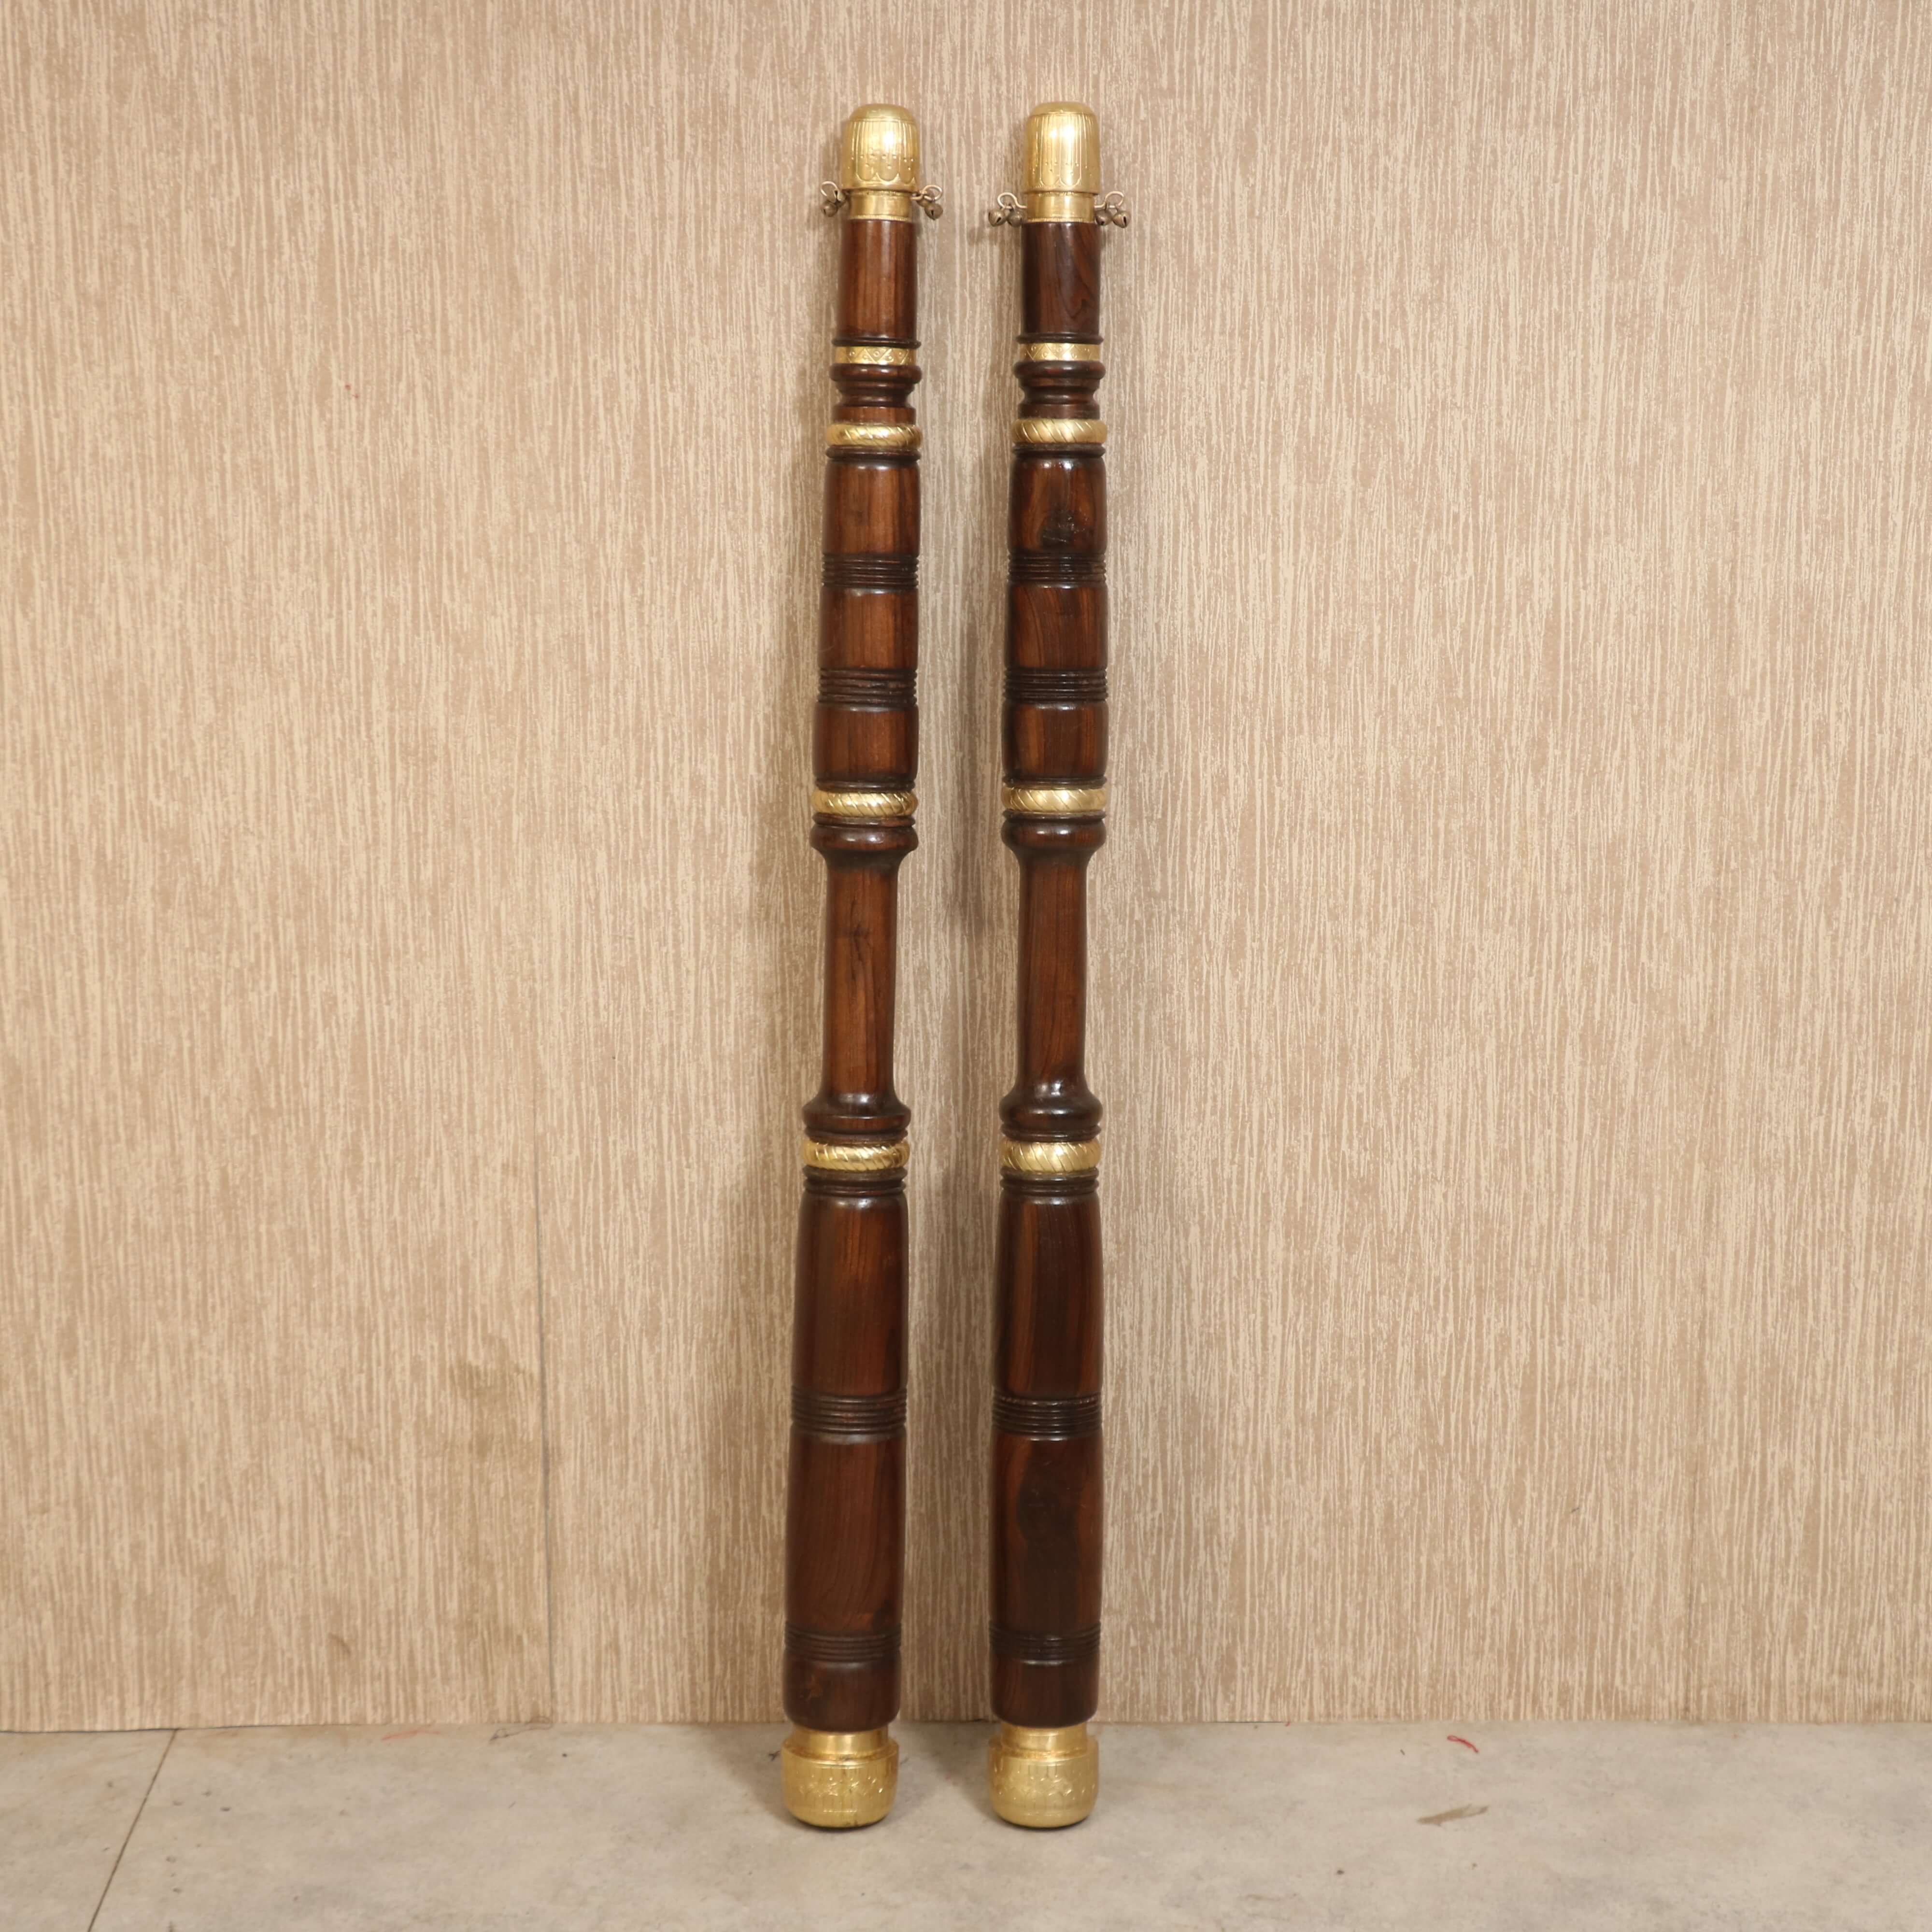 Okhali Musal Solid Teak Wood Rod with Brass fitting Set of 2 Traditional Décor